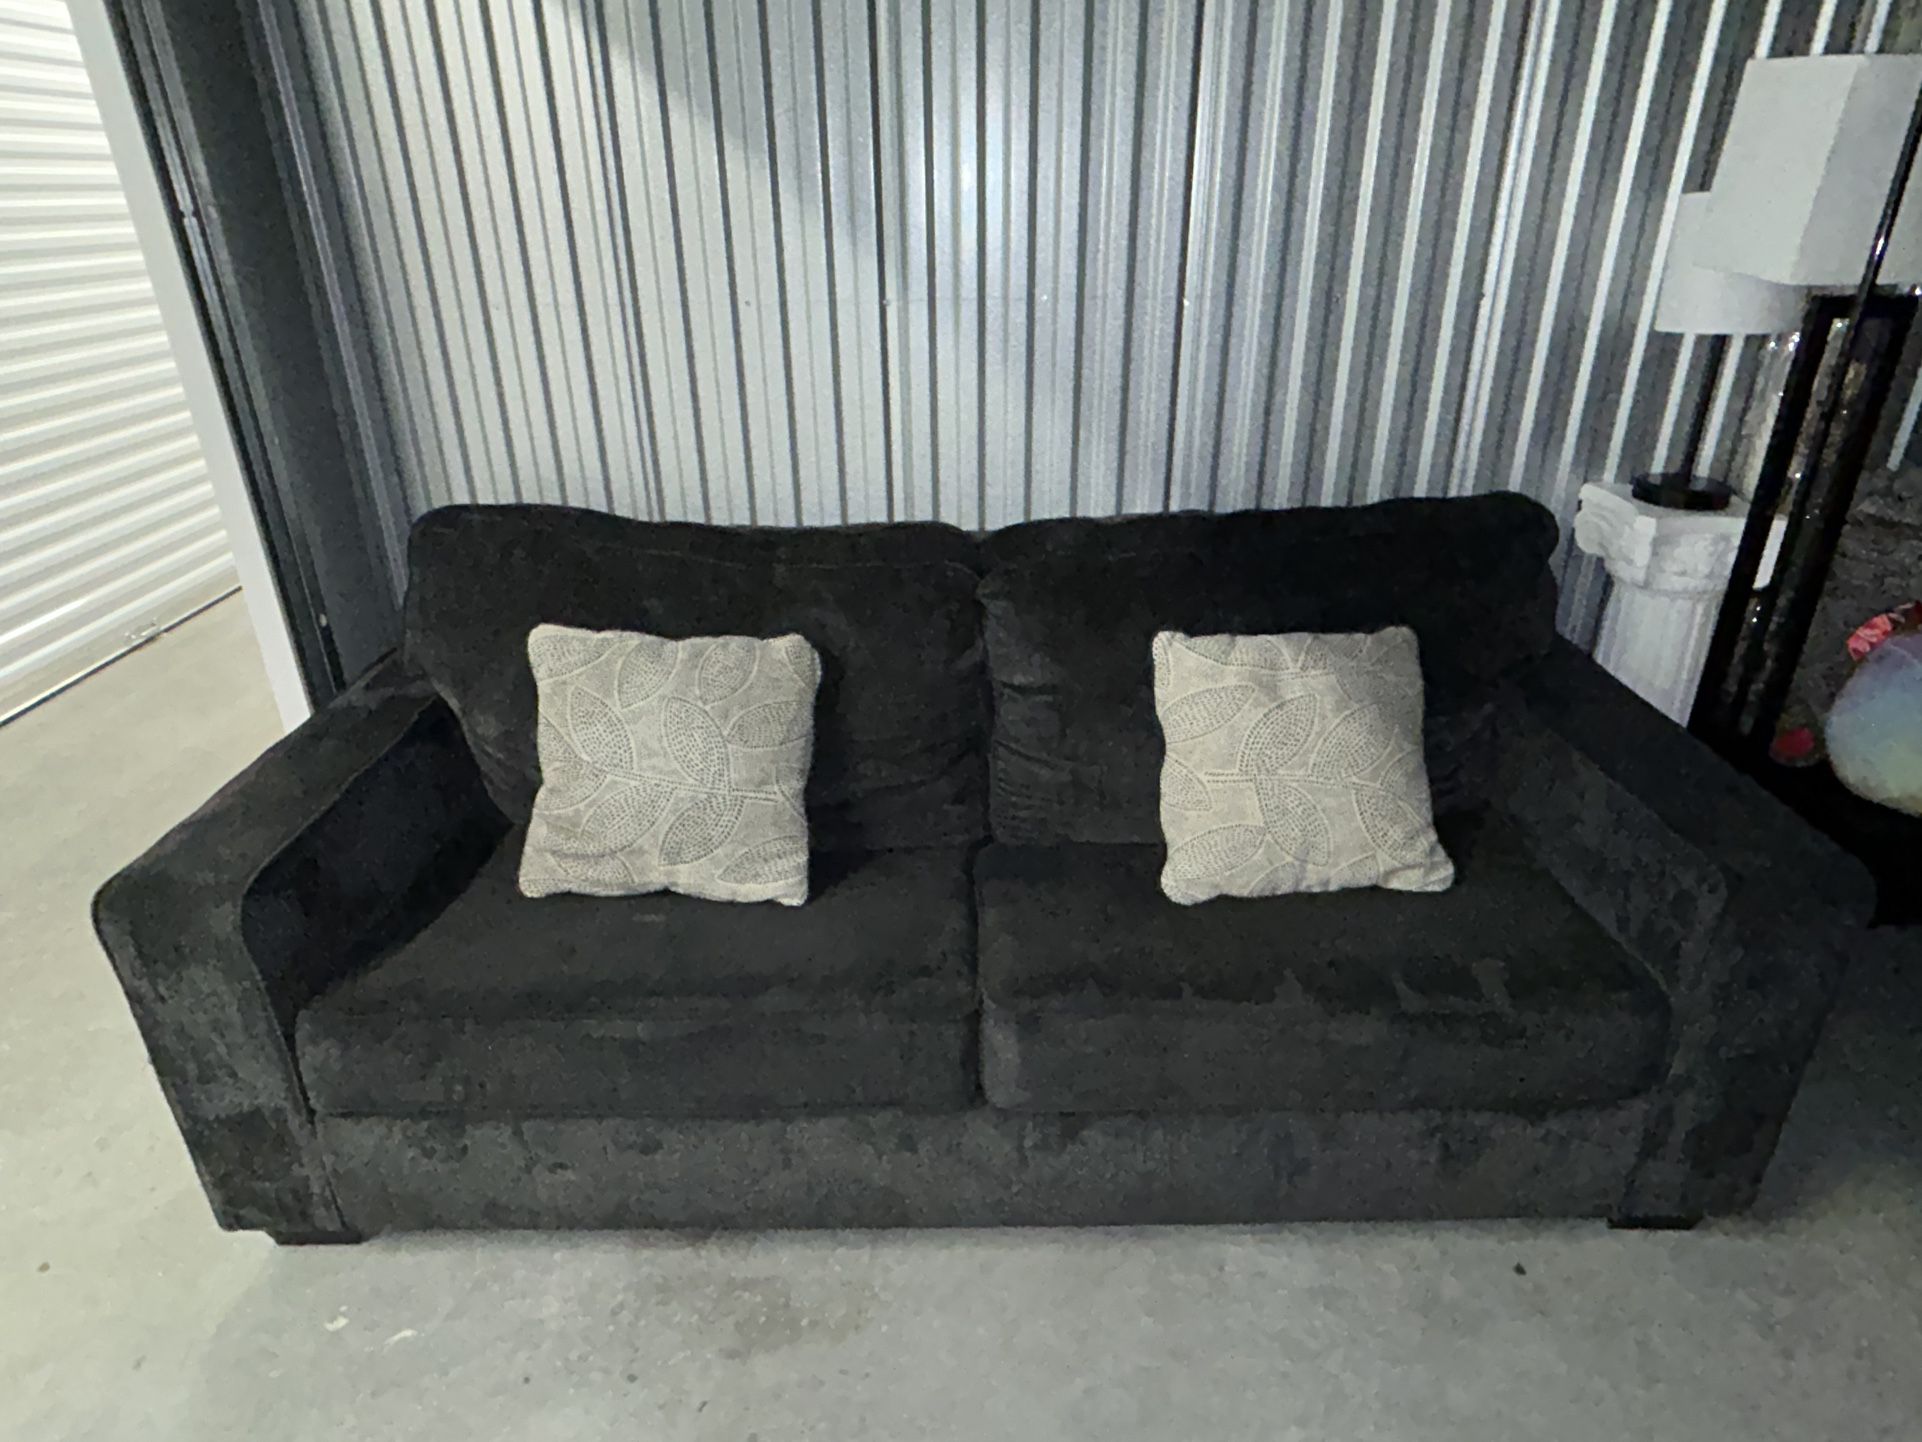 gray sofa/pull out couch